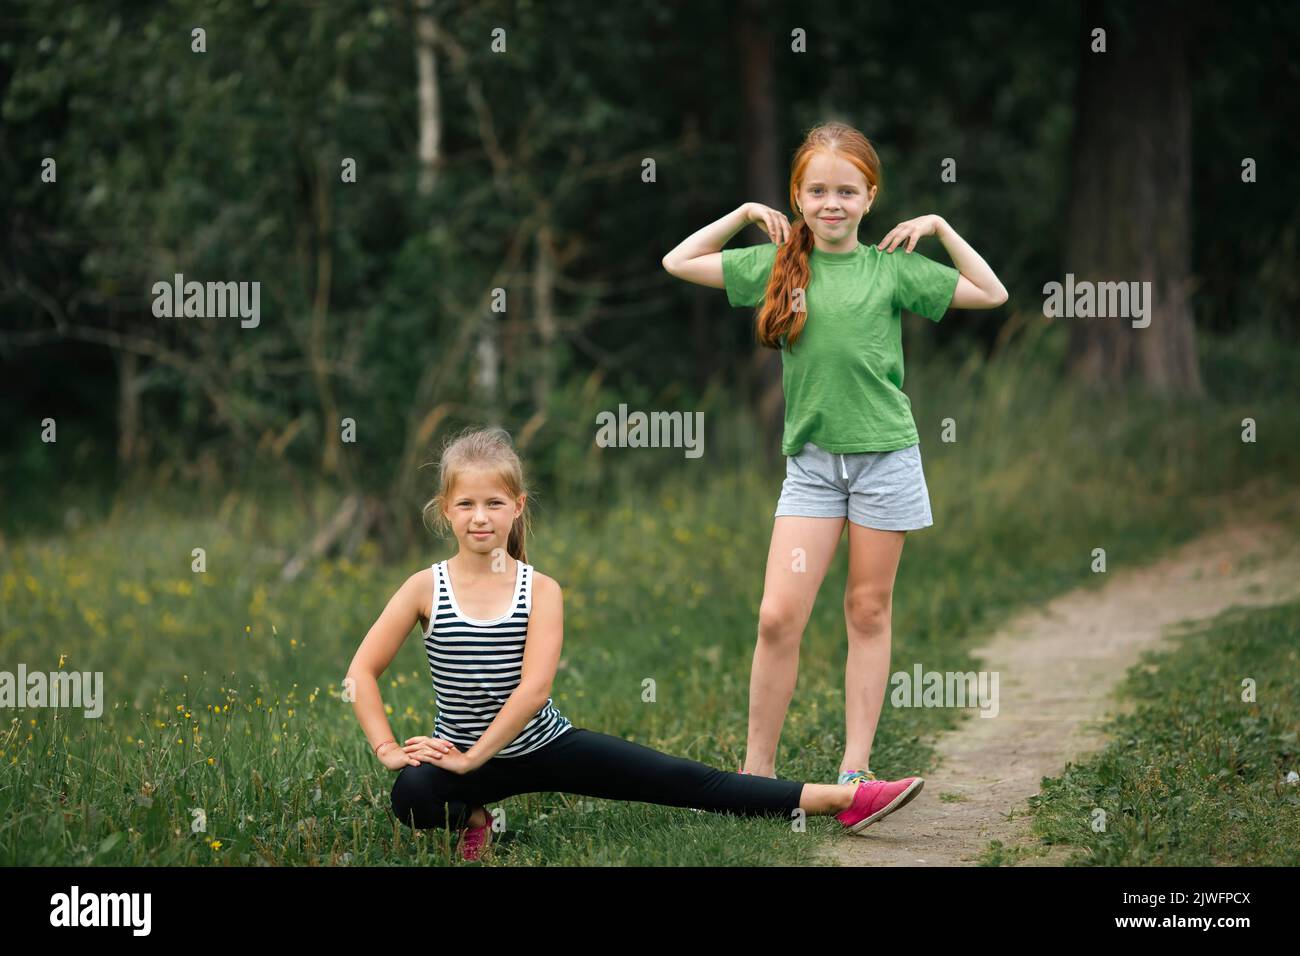 Two teen girls warming up before a jog in the park. Stock Photo